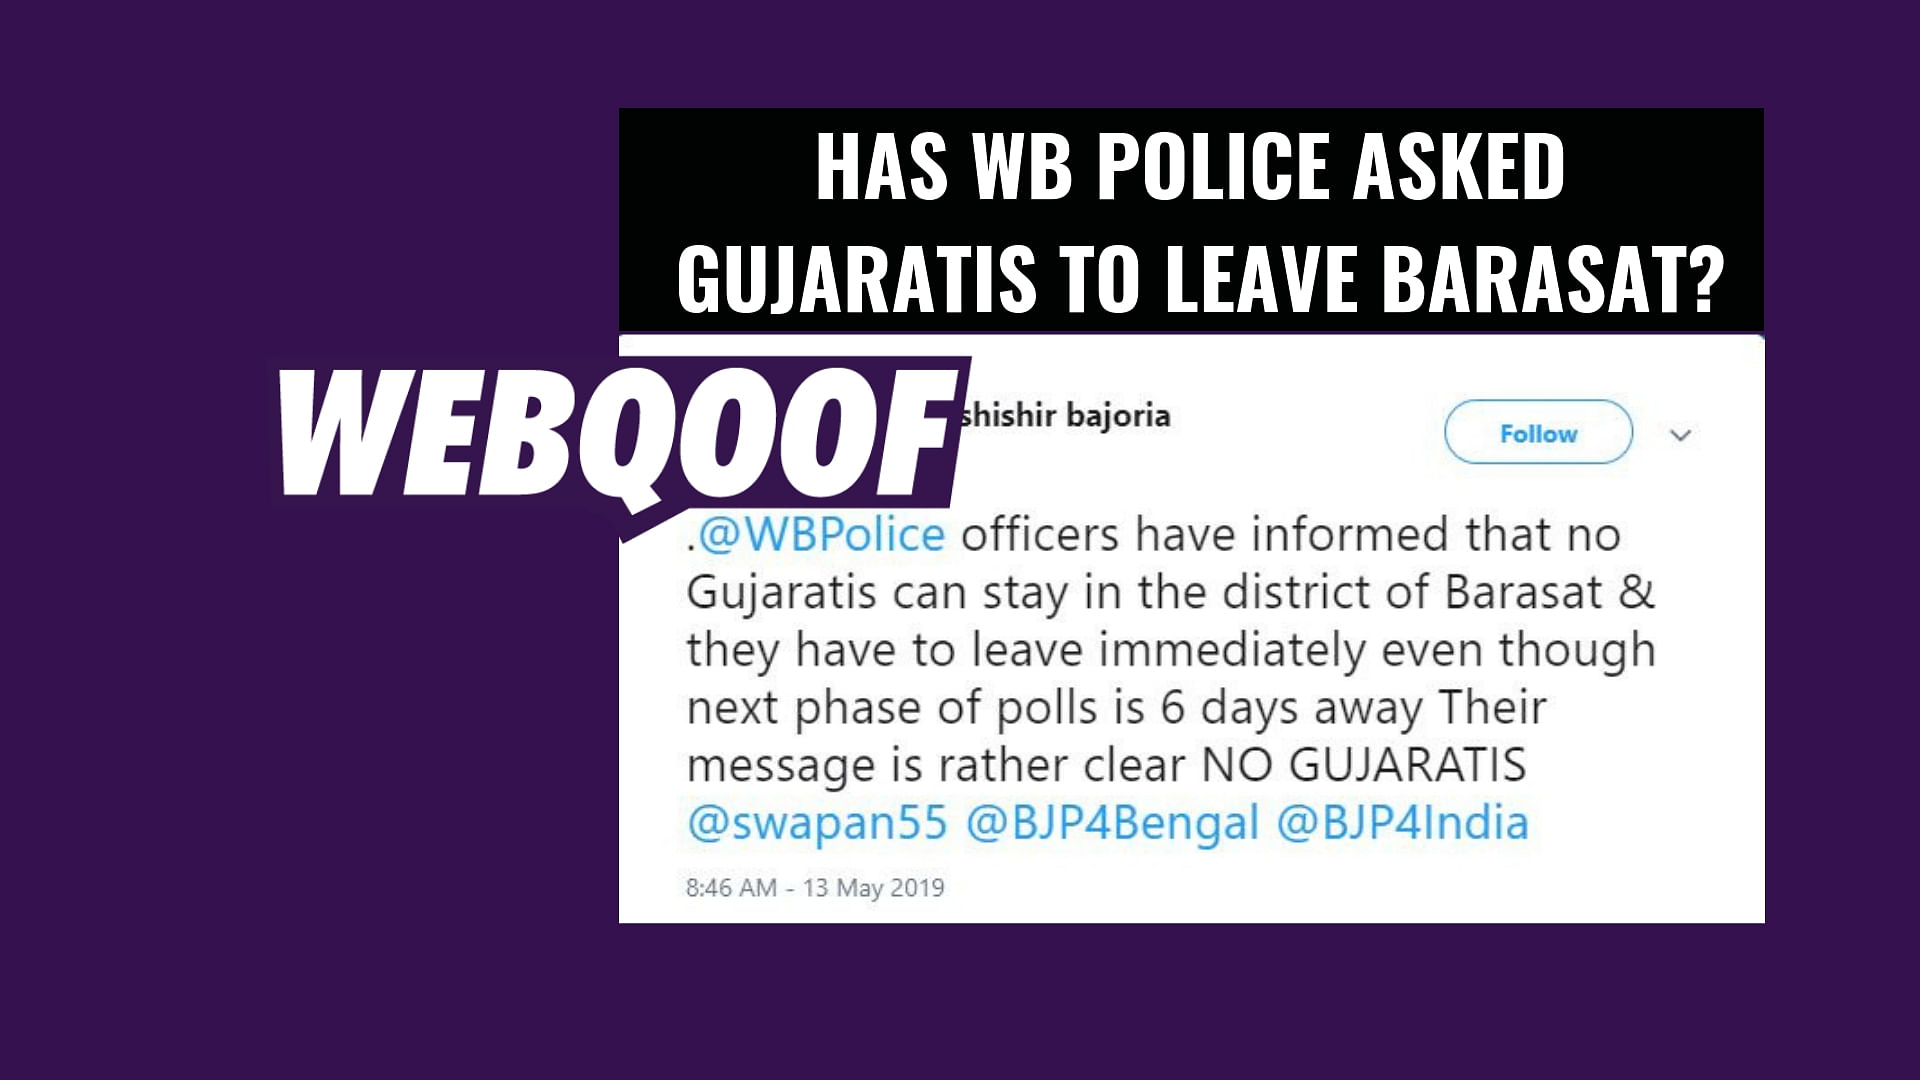 While chatter on social media suggests that all Gujaratis have been asked to leave, the state police denied this.